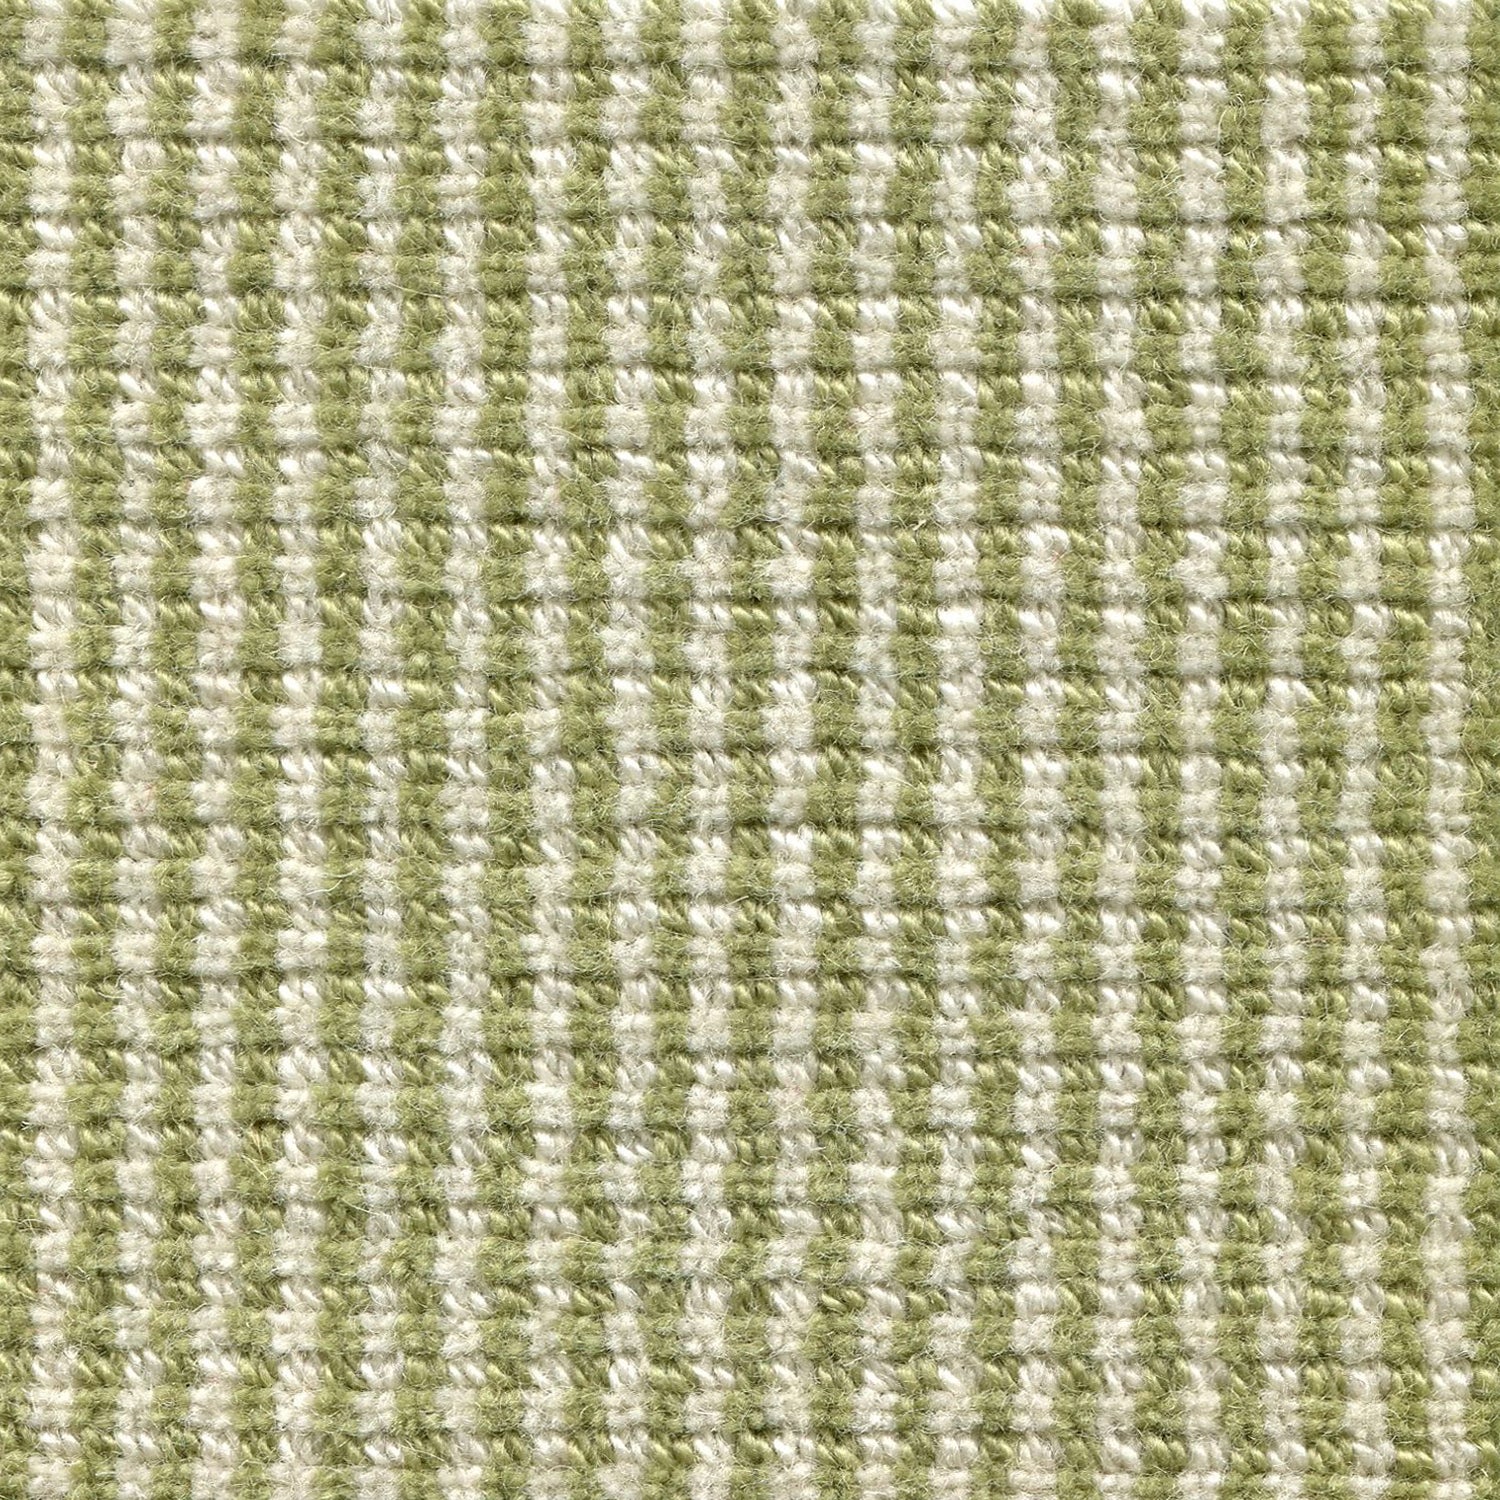 Wool broadloom carpet swatch in a high-pile striped weave in green and white.